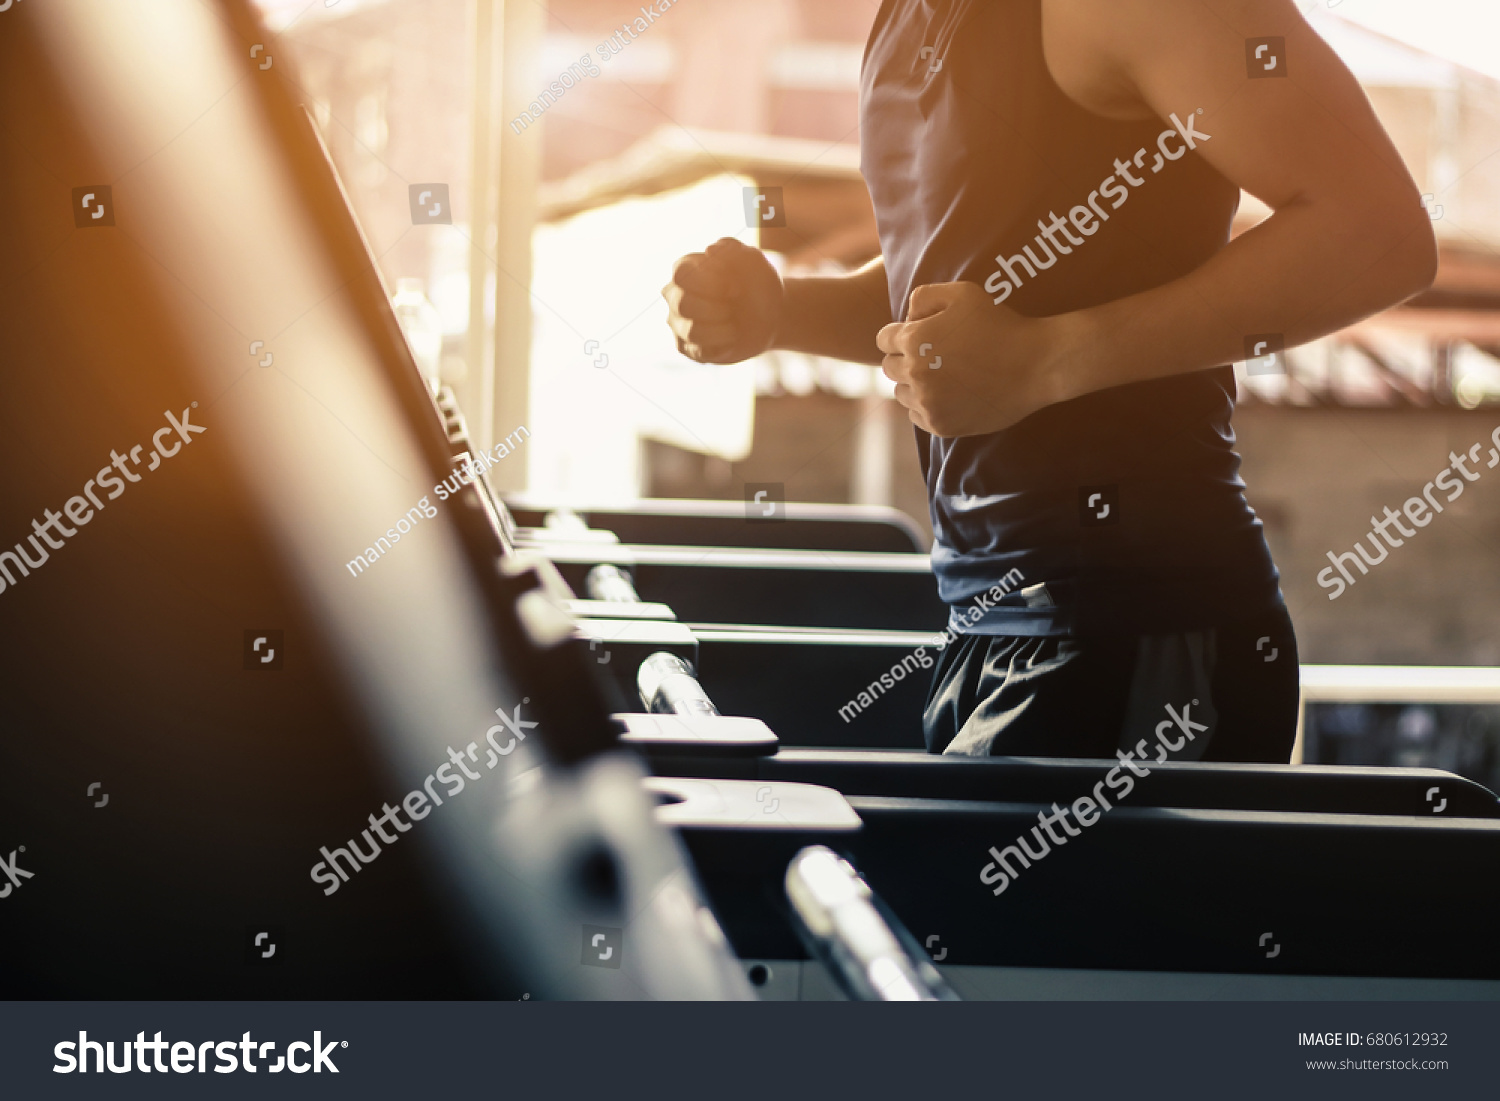 Man running in a modern gym on a treadmill concept for exercising, fitness and healthy lifestyl.lowkeylight.vintage tone.selective focus. #680612932